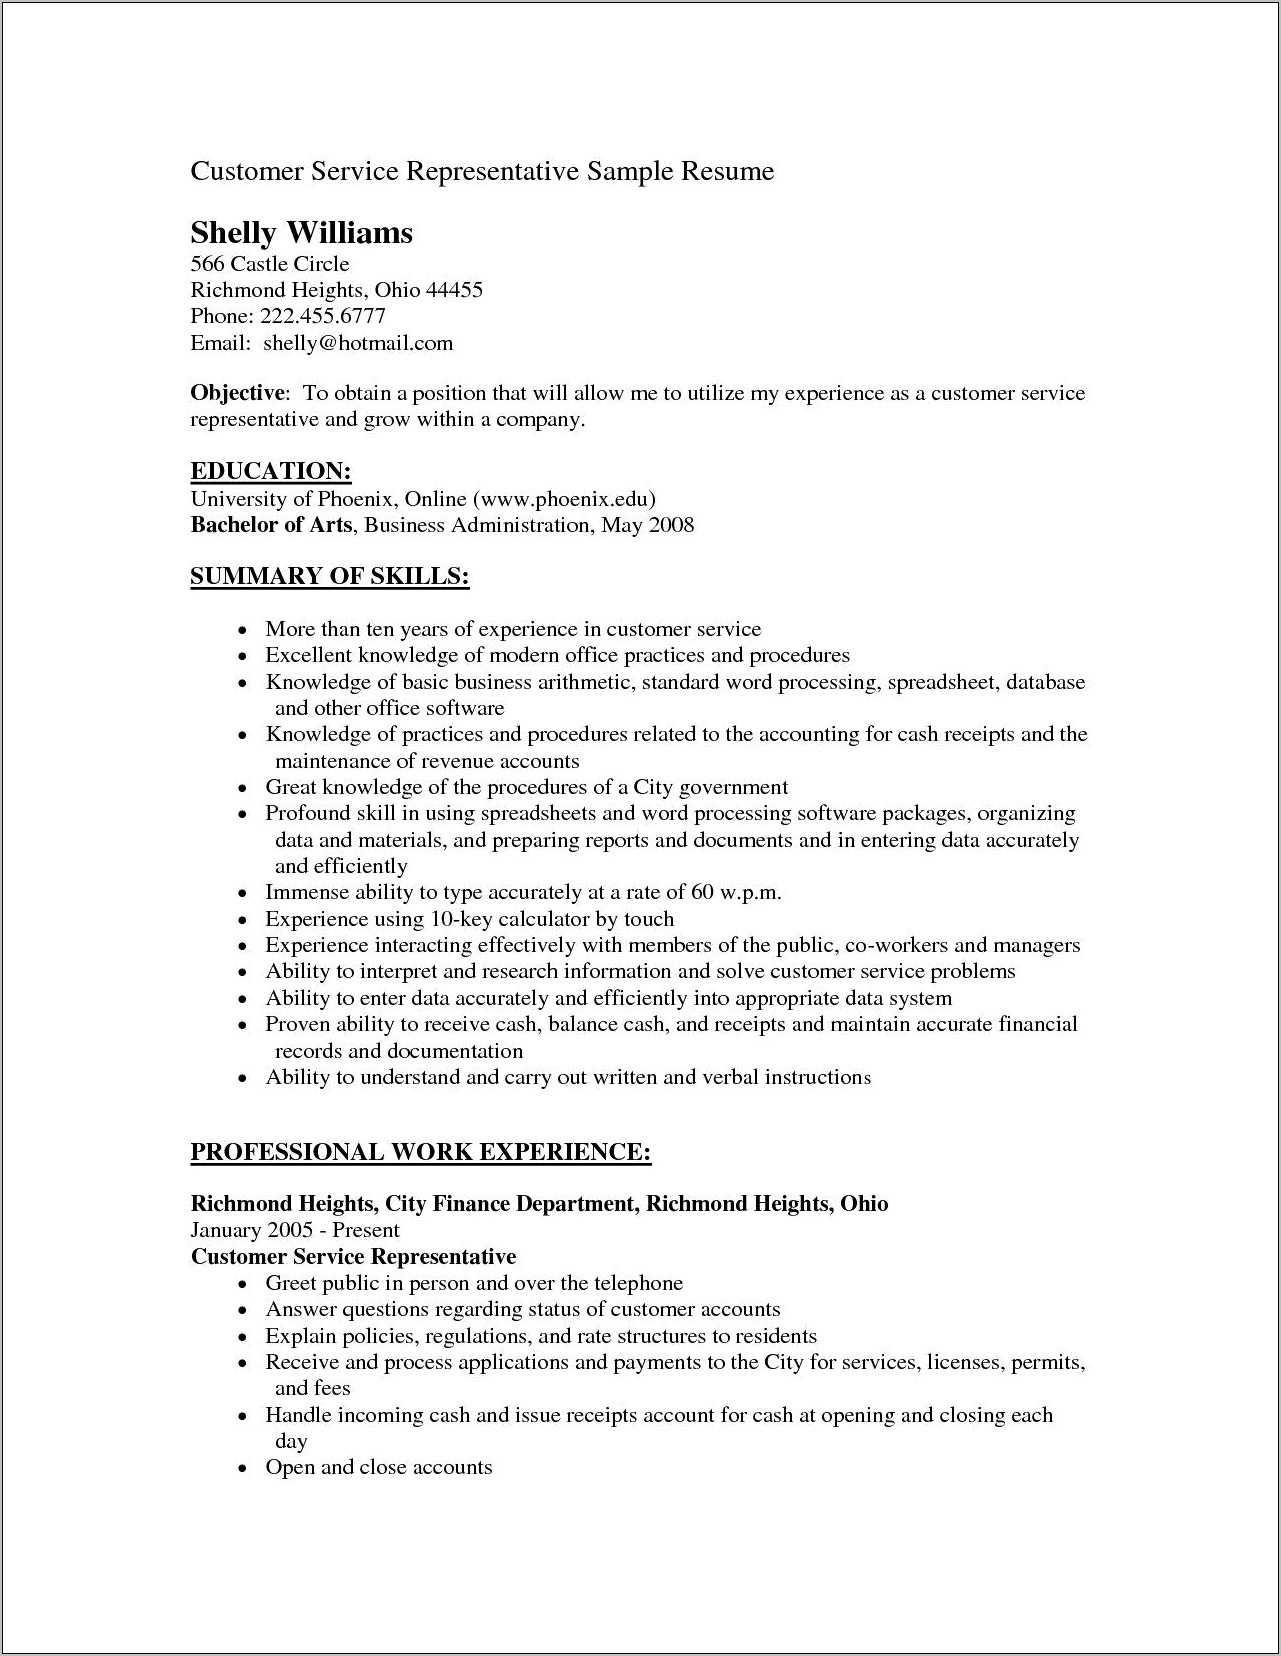 Resume Objective For Custtomer Service Rep